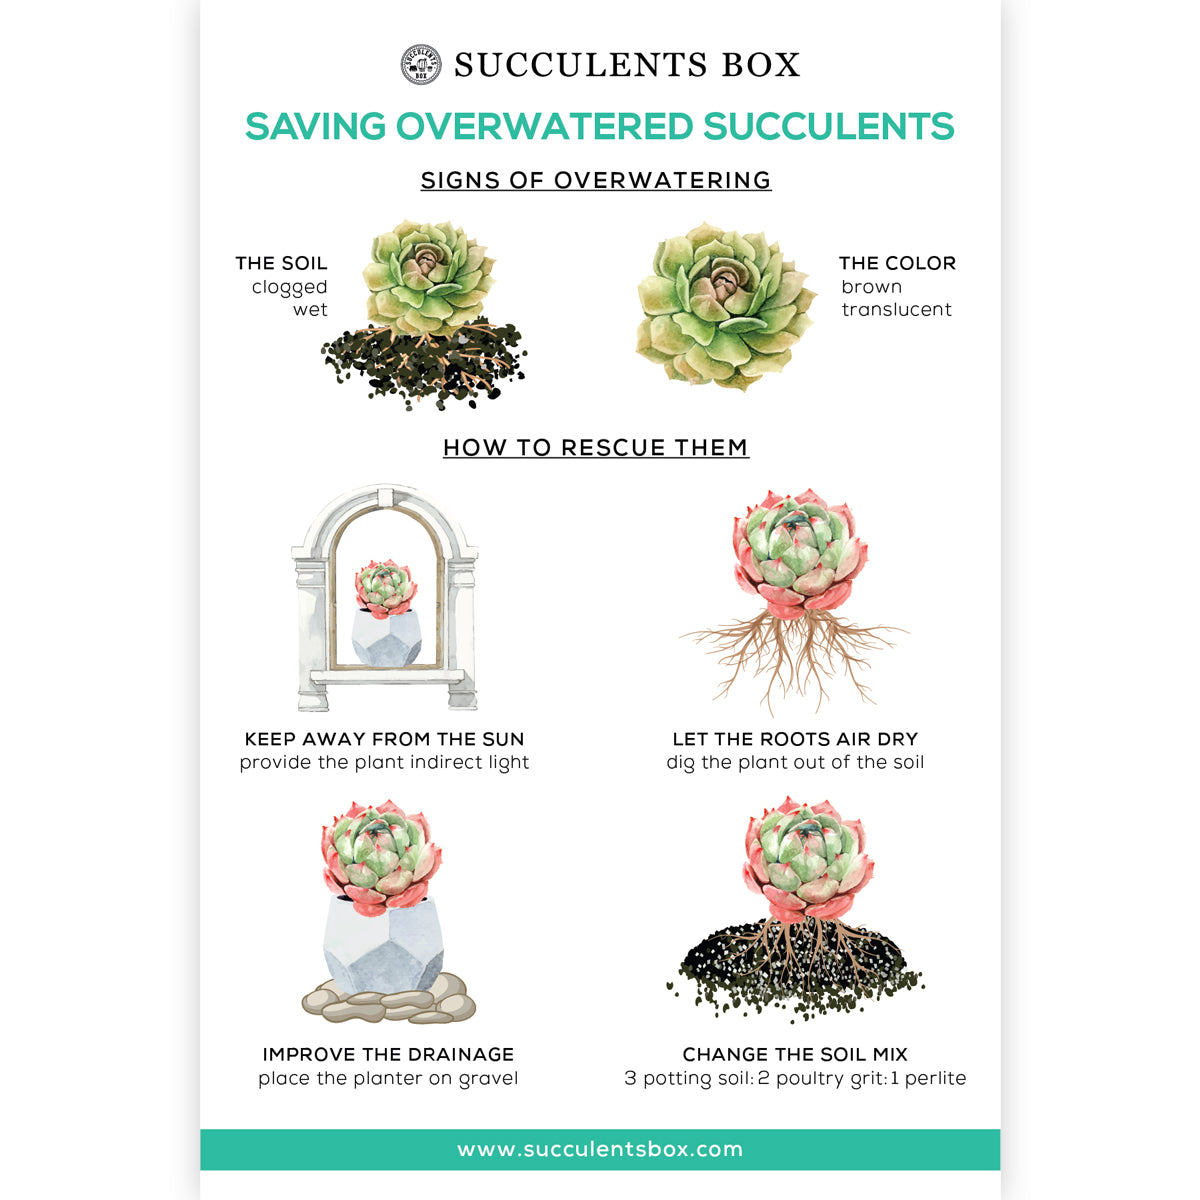 Saving Overwatered Succulents Card for sale, Succulent Care Card for sale, Succulent Gift Ideas